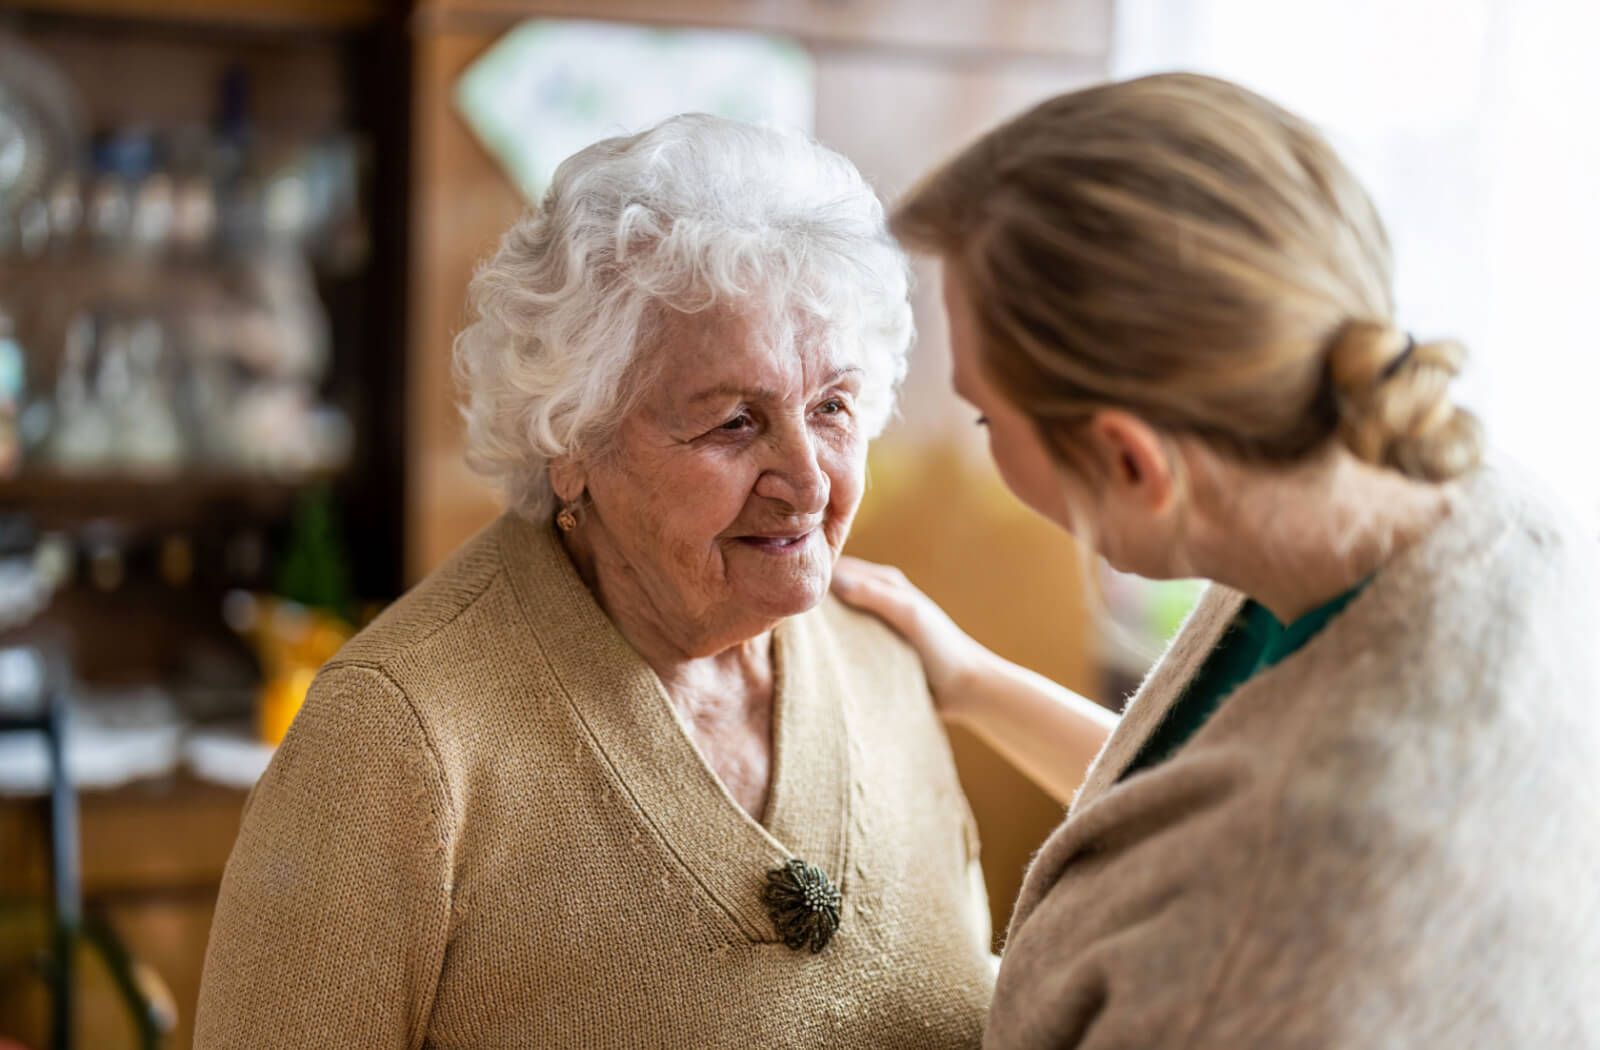 A caregiver examining an older adult woman who is experiencing disorientation and confusion.